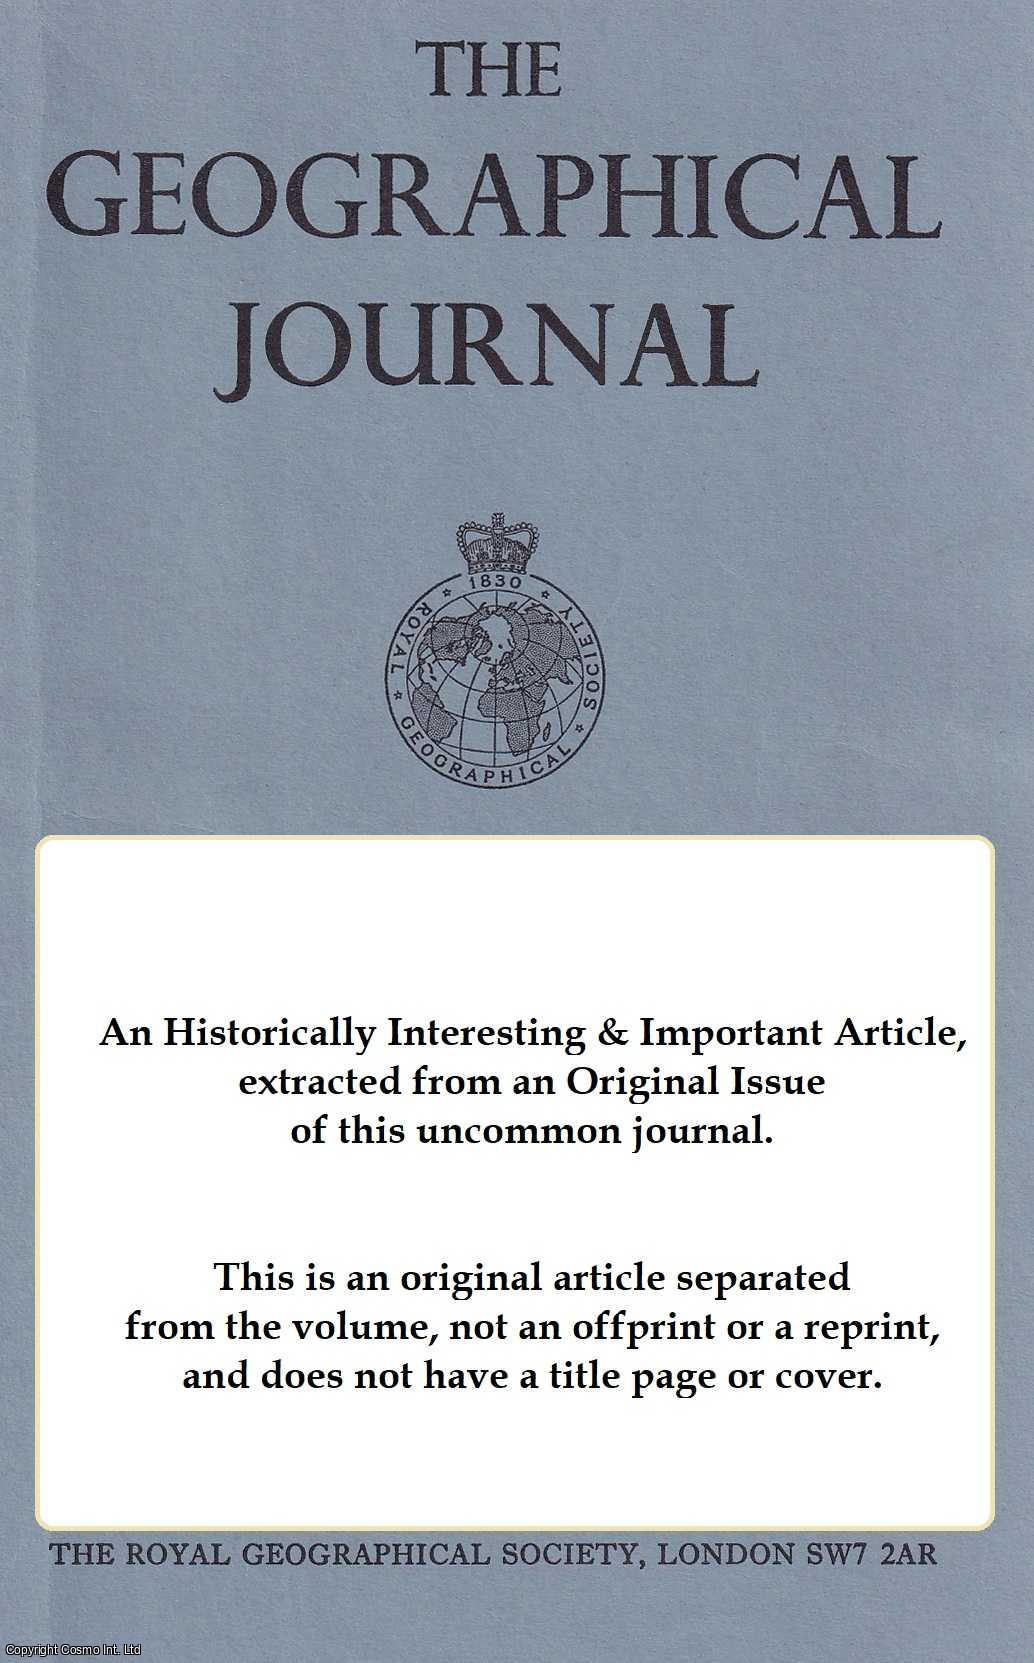 W. H. I. - The Hadramaut, The Southern Gates of Arabia: Review. An original article from the Geographical Journal, 1936.